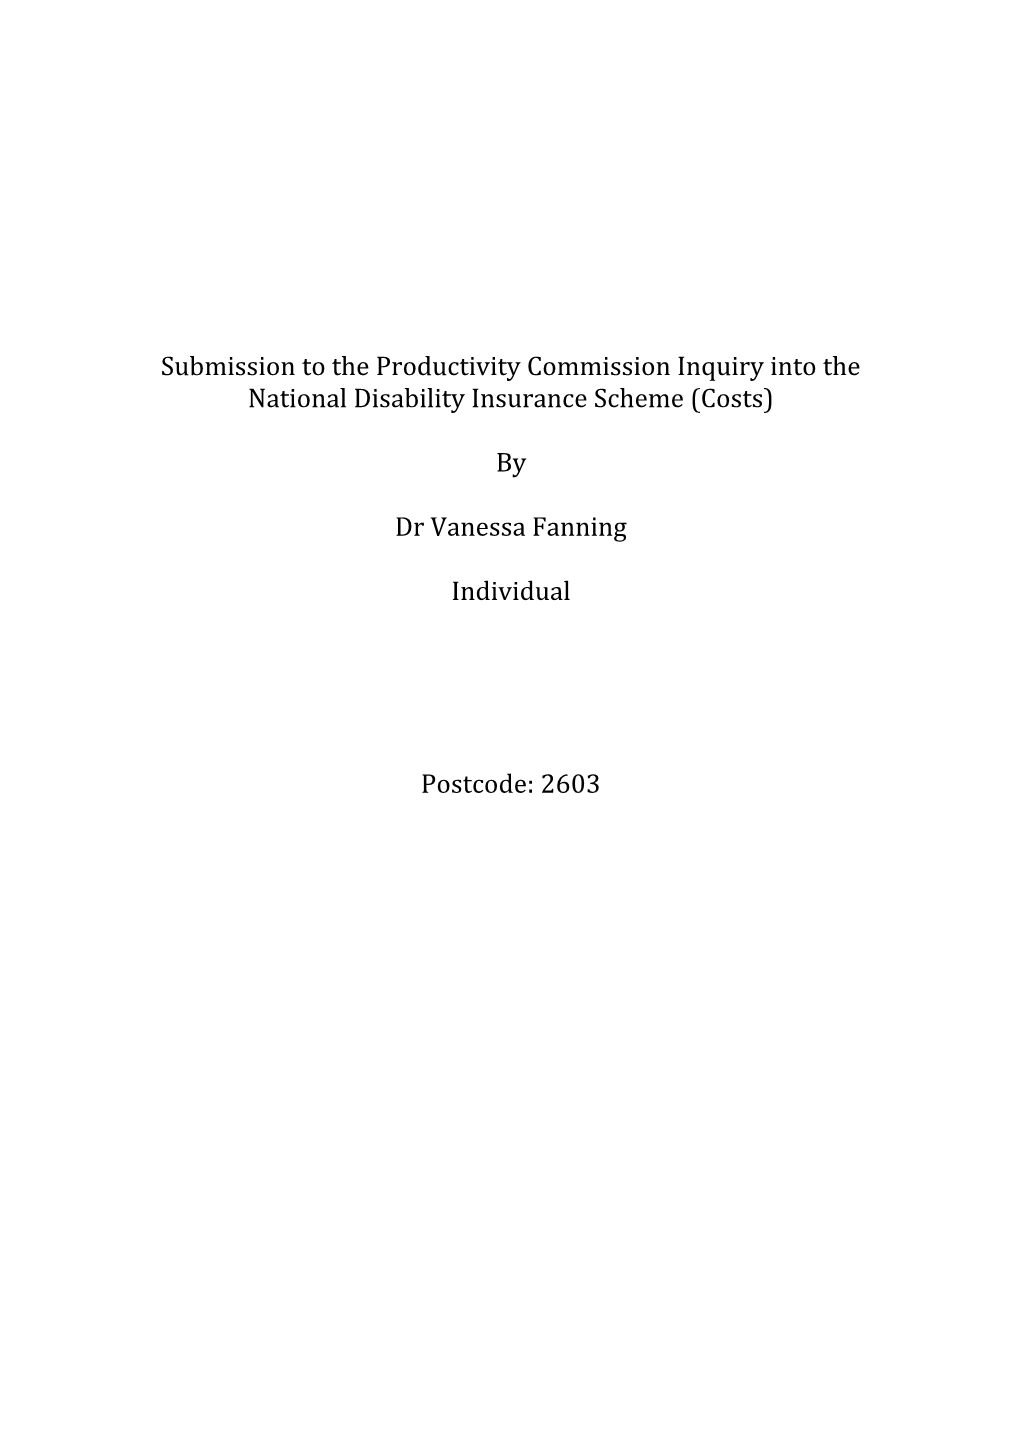 Submission 21 - Vanessa Fanning - National Disability Insurance Scheme (NDIS) Costs